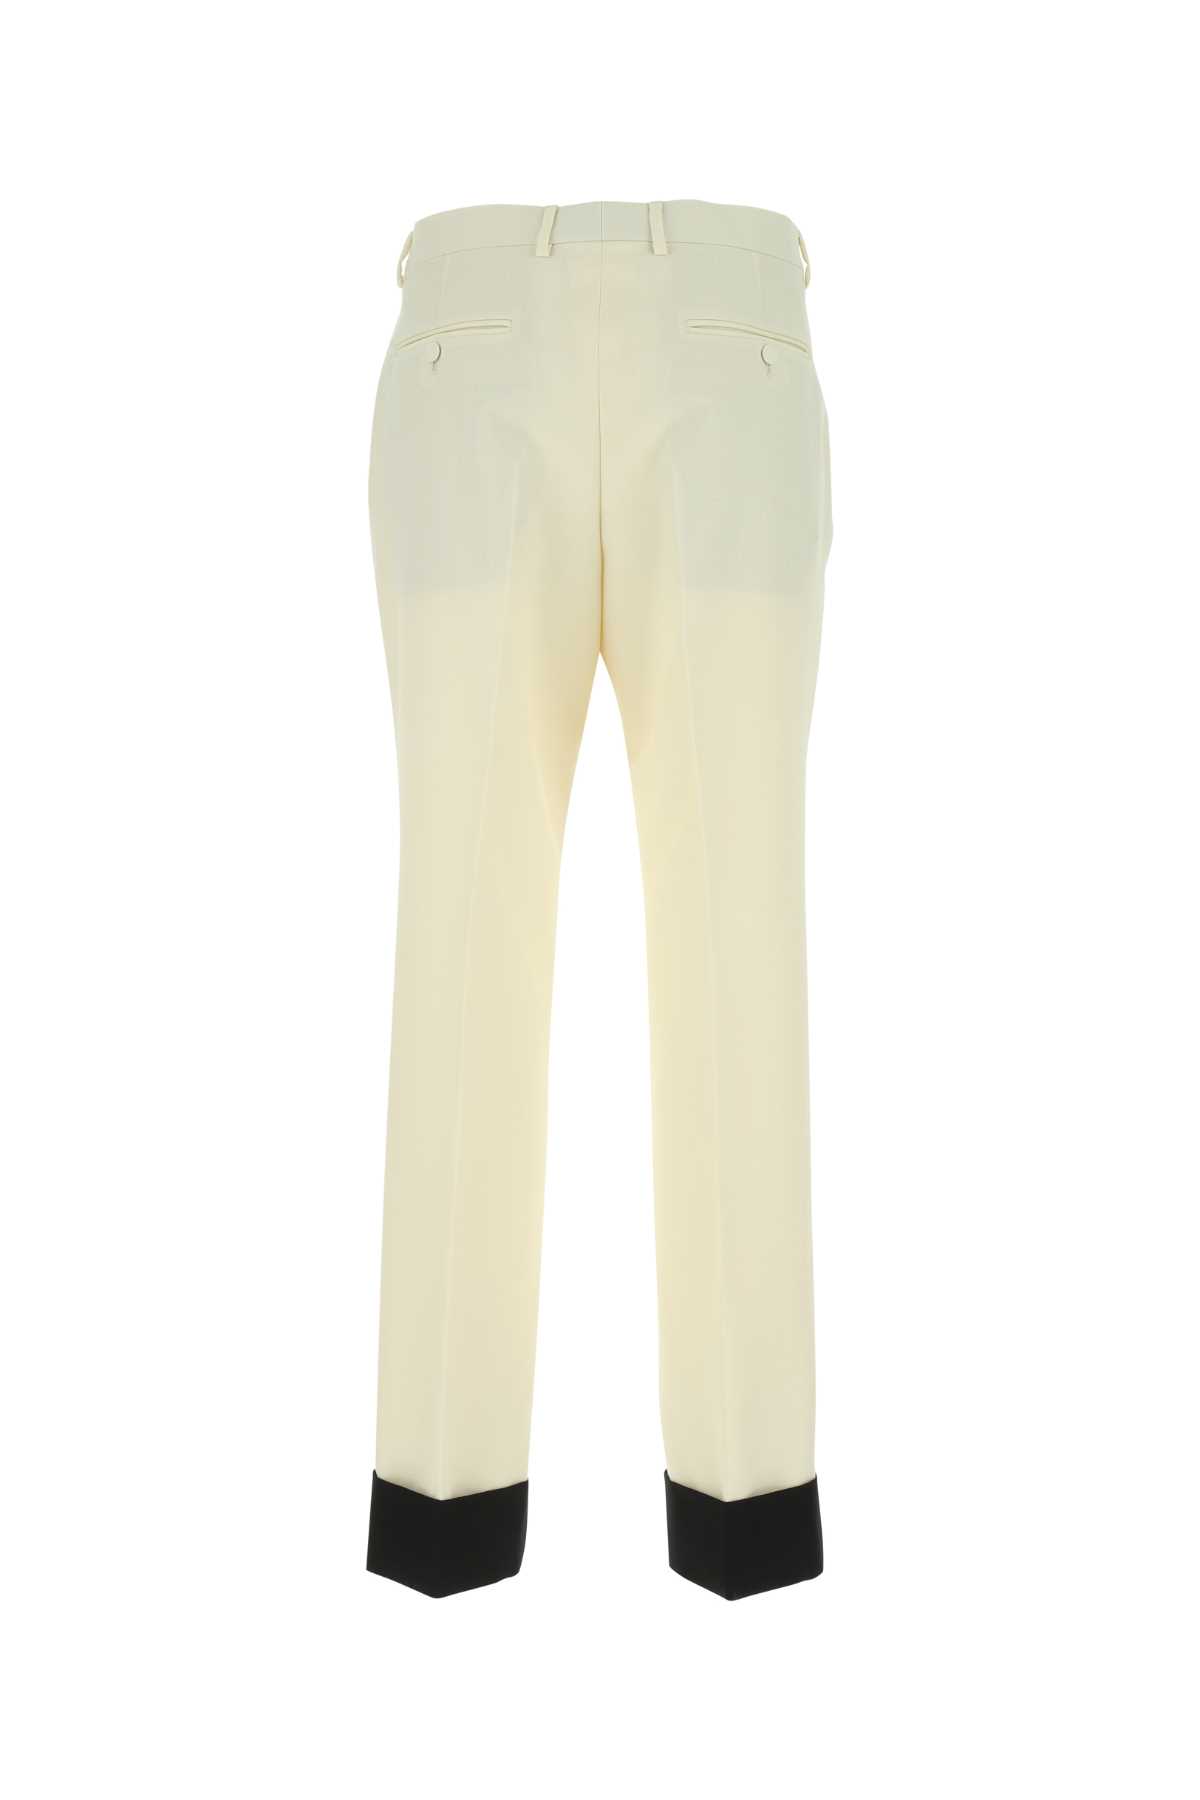 Shop Gucci Ivory Wool Blend Pant In 9198